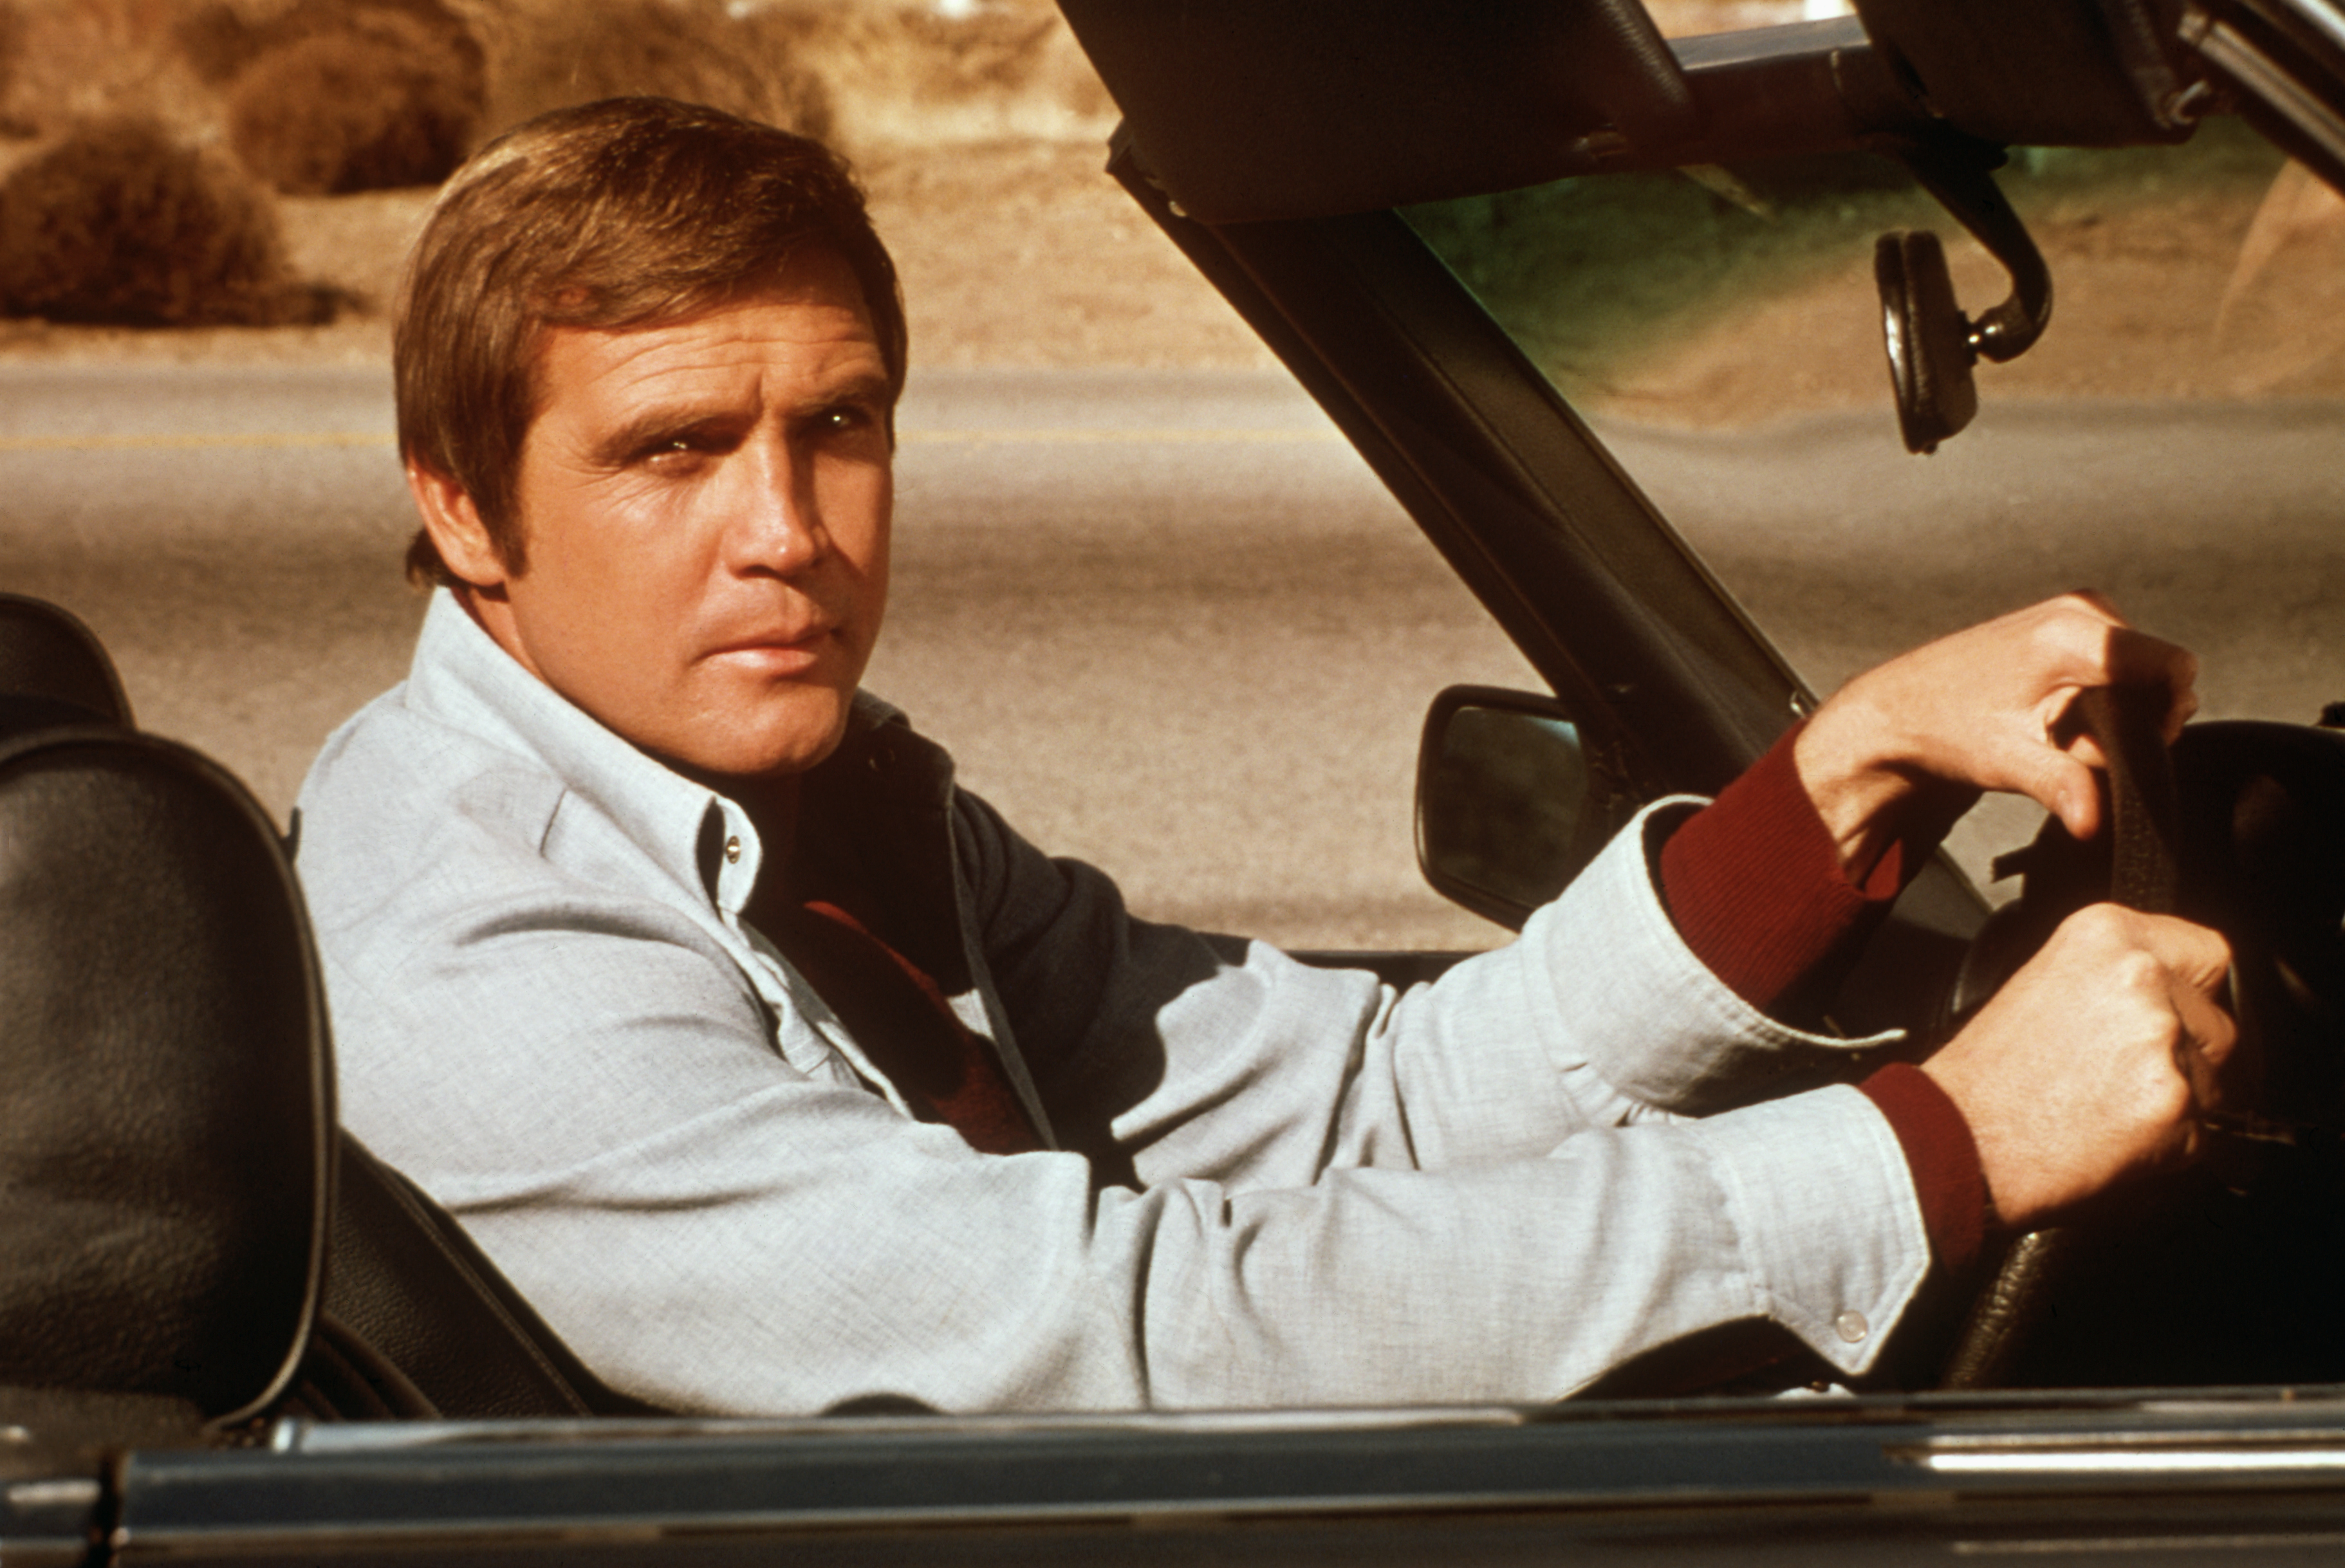 Lee Majors riding in an automobile during a scene from his television show, "The Six Million Dollar Man" in 1973 | Source: Getty Images